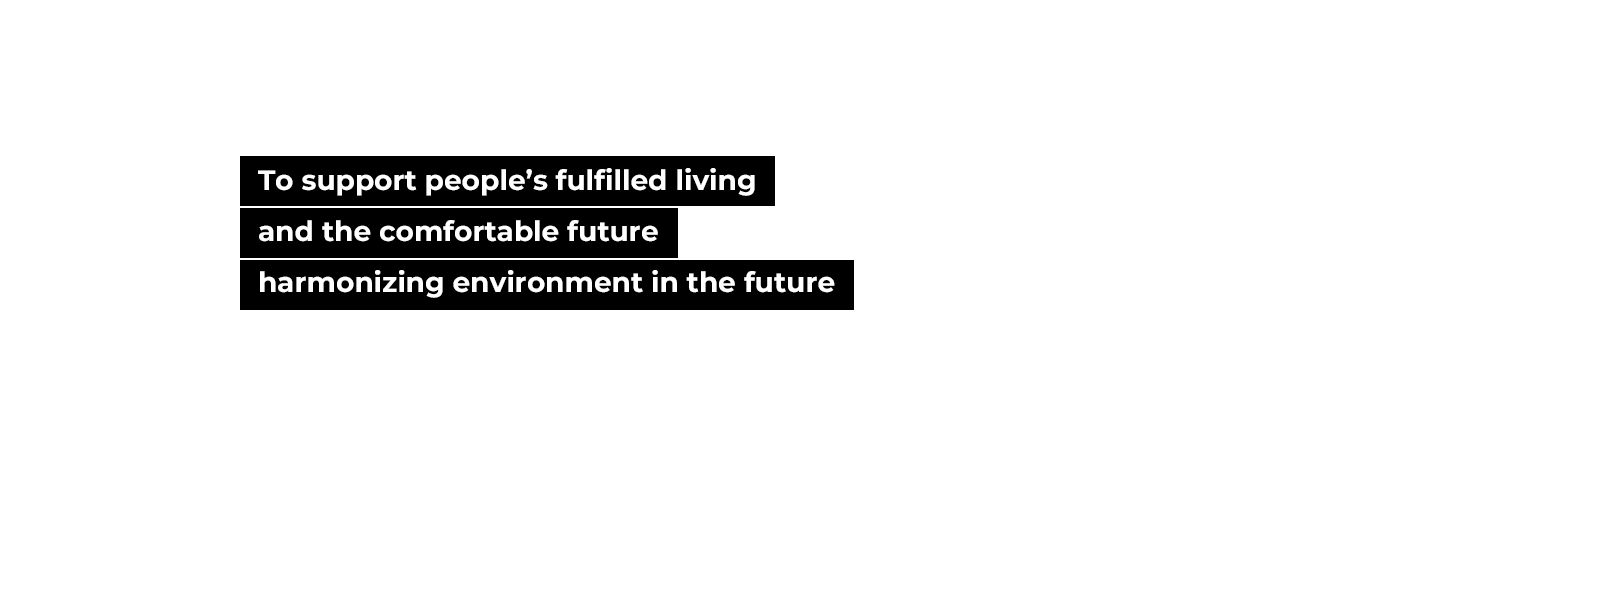 To support people’s fulfilled living and the comfortable future harmonizing environment in the future